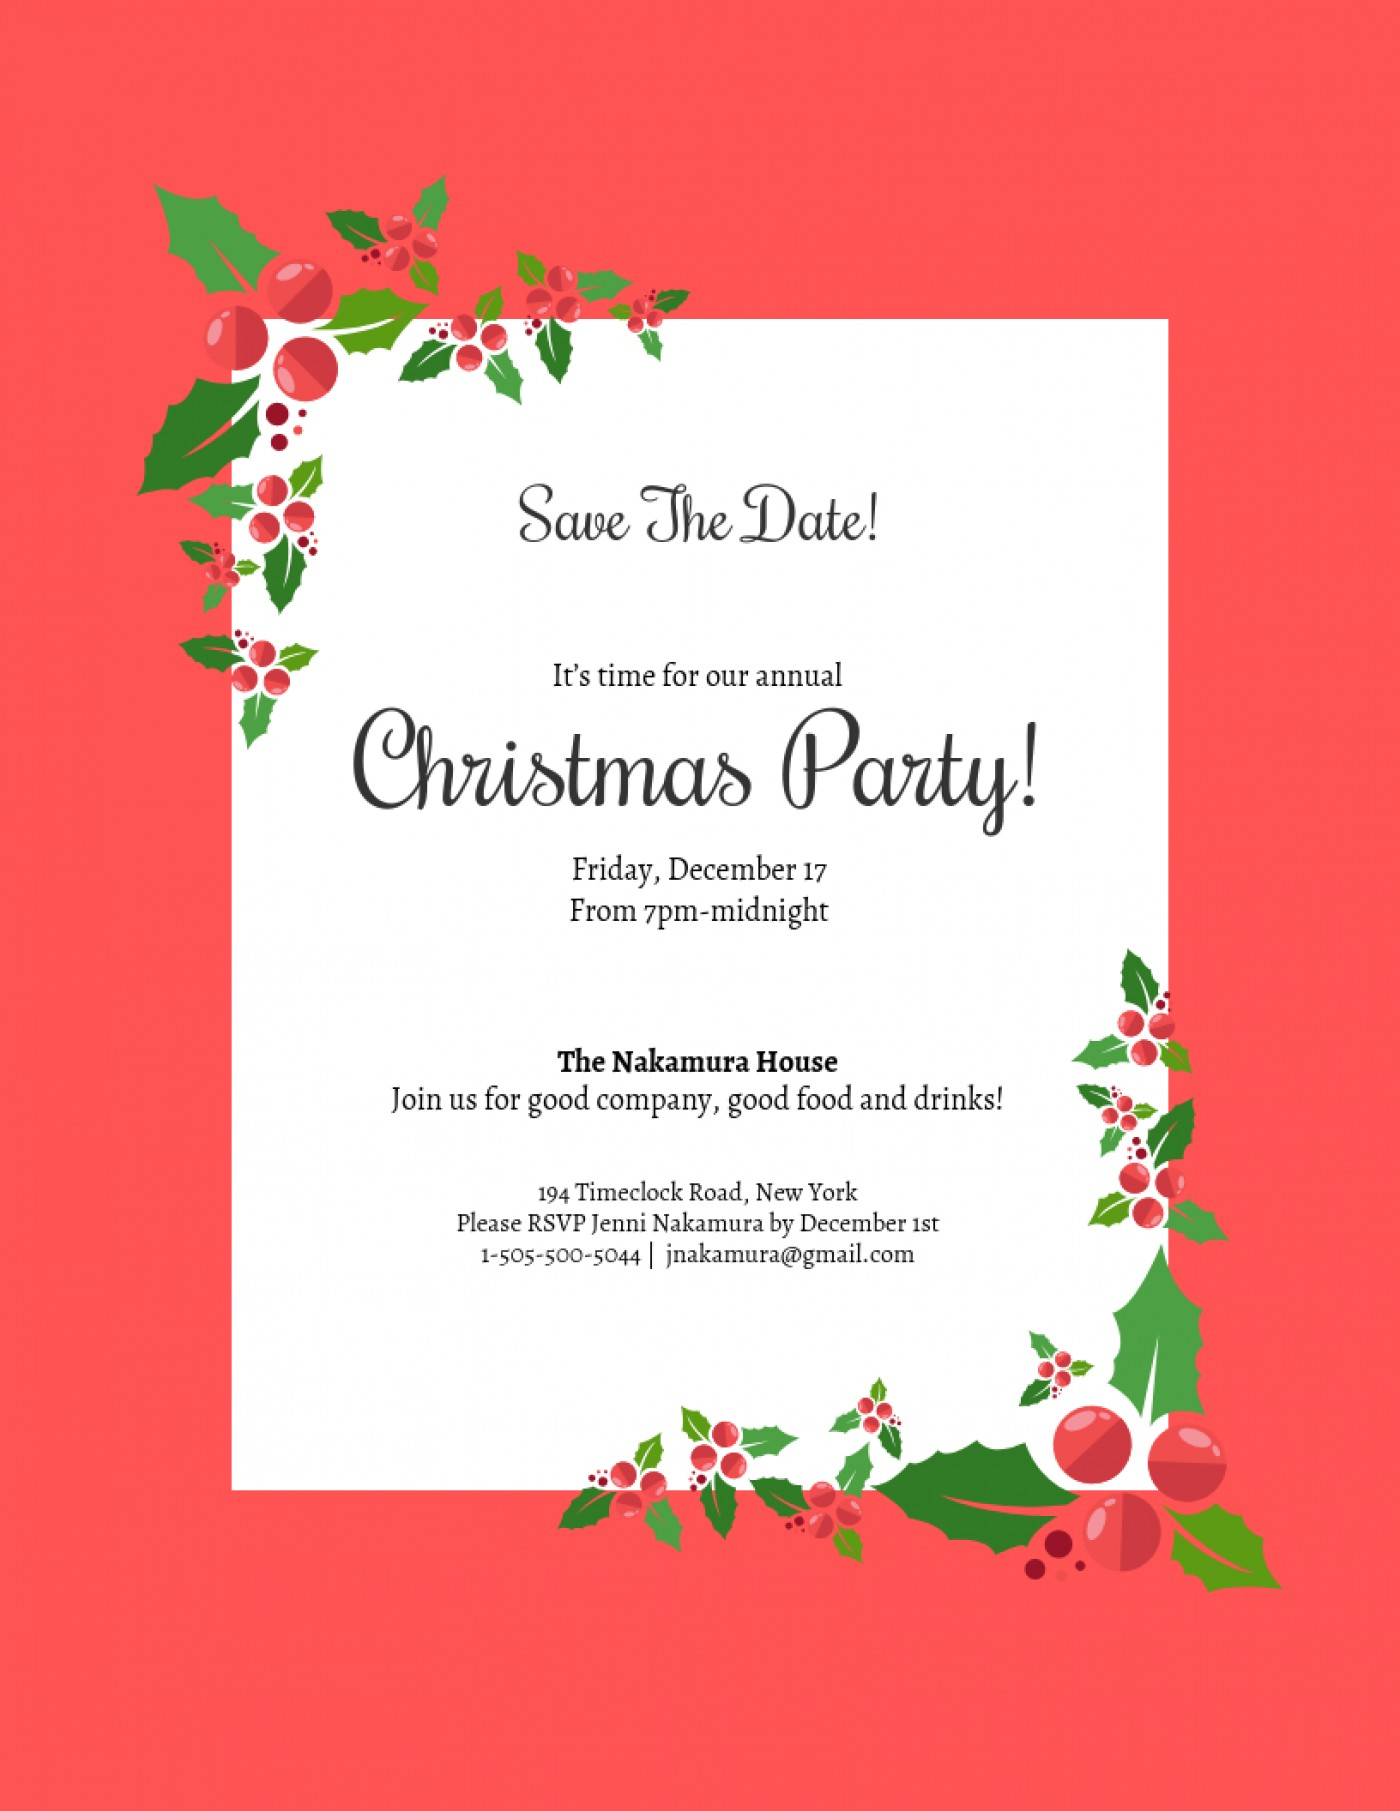 009 Free Holiday Party Invitation Templates Powerpoint With Regard To Save The Date Powerpoint Template